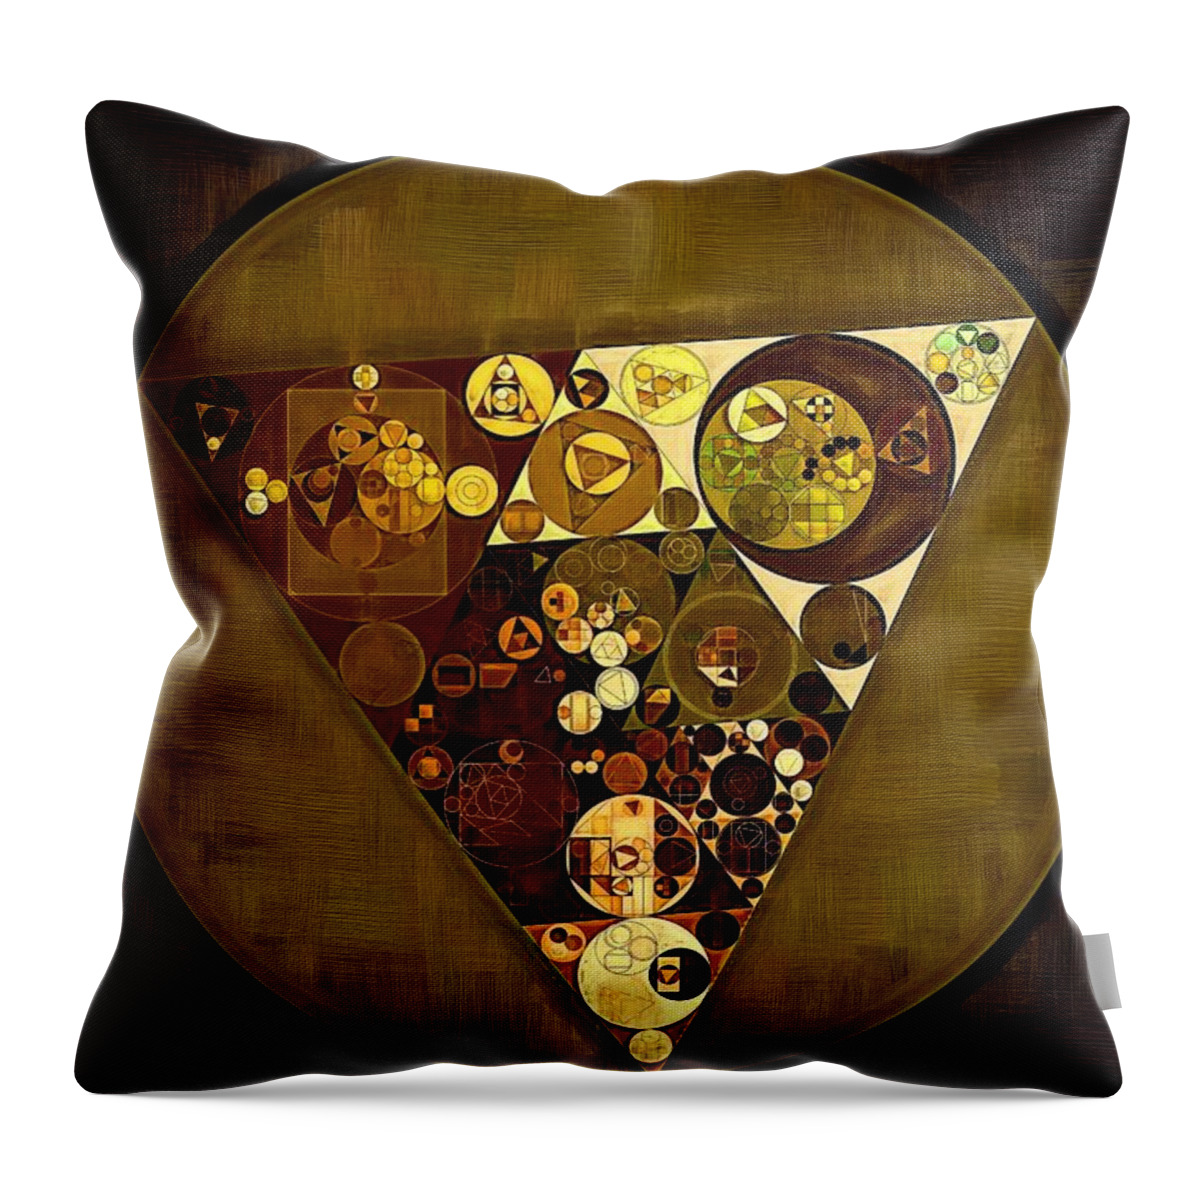 Effect Throw Pillow featuring the digital art Abstract painting - Golden sand #2 by Vitaliy Gladkiy